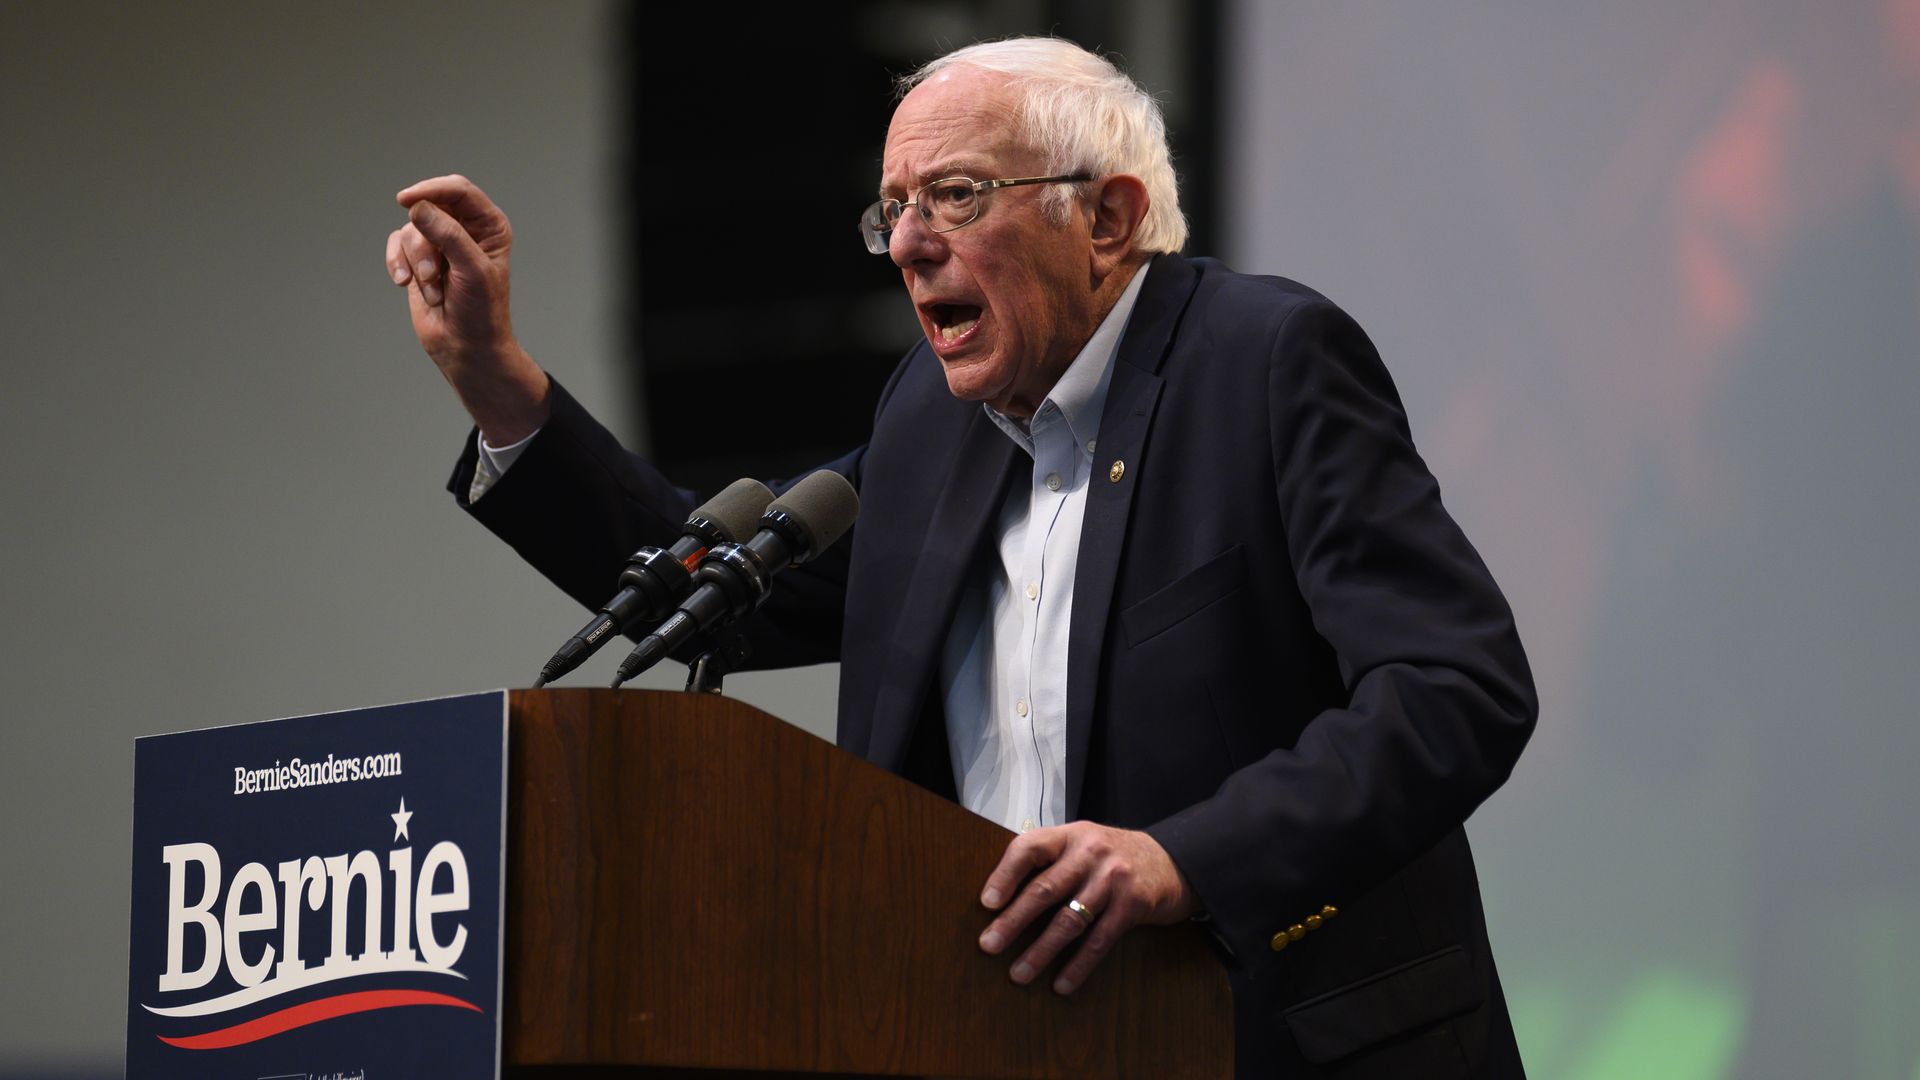  Democratic Presidential candidate Bernie Sanders (I-VT) speaks during the Climate Crisis Summit at Drake University on November 9